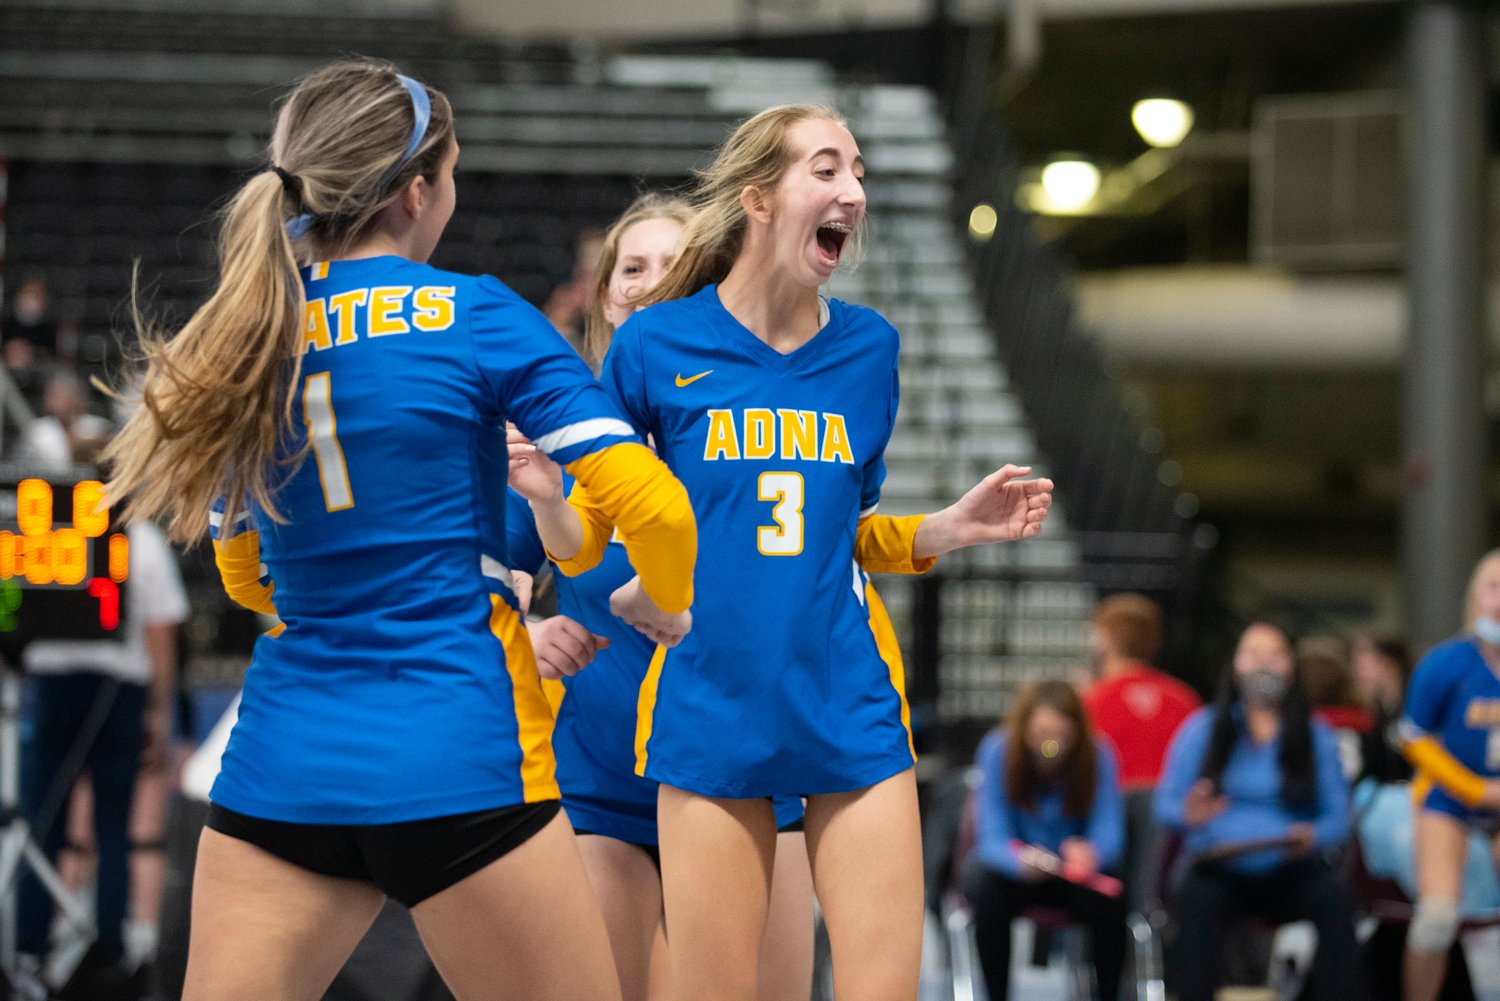 Adna’s Miriam Wilson (3) celebrates after the Pirates score against Warden at the state tournament Thursday in Yakima.